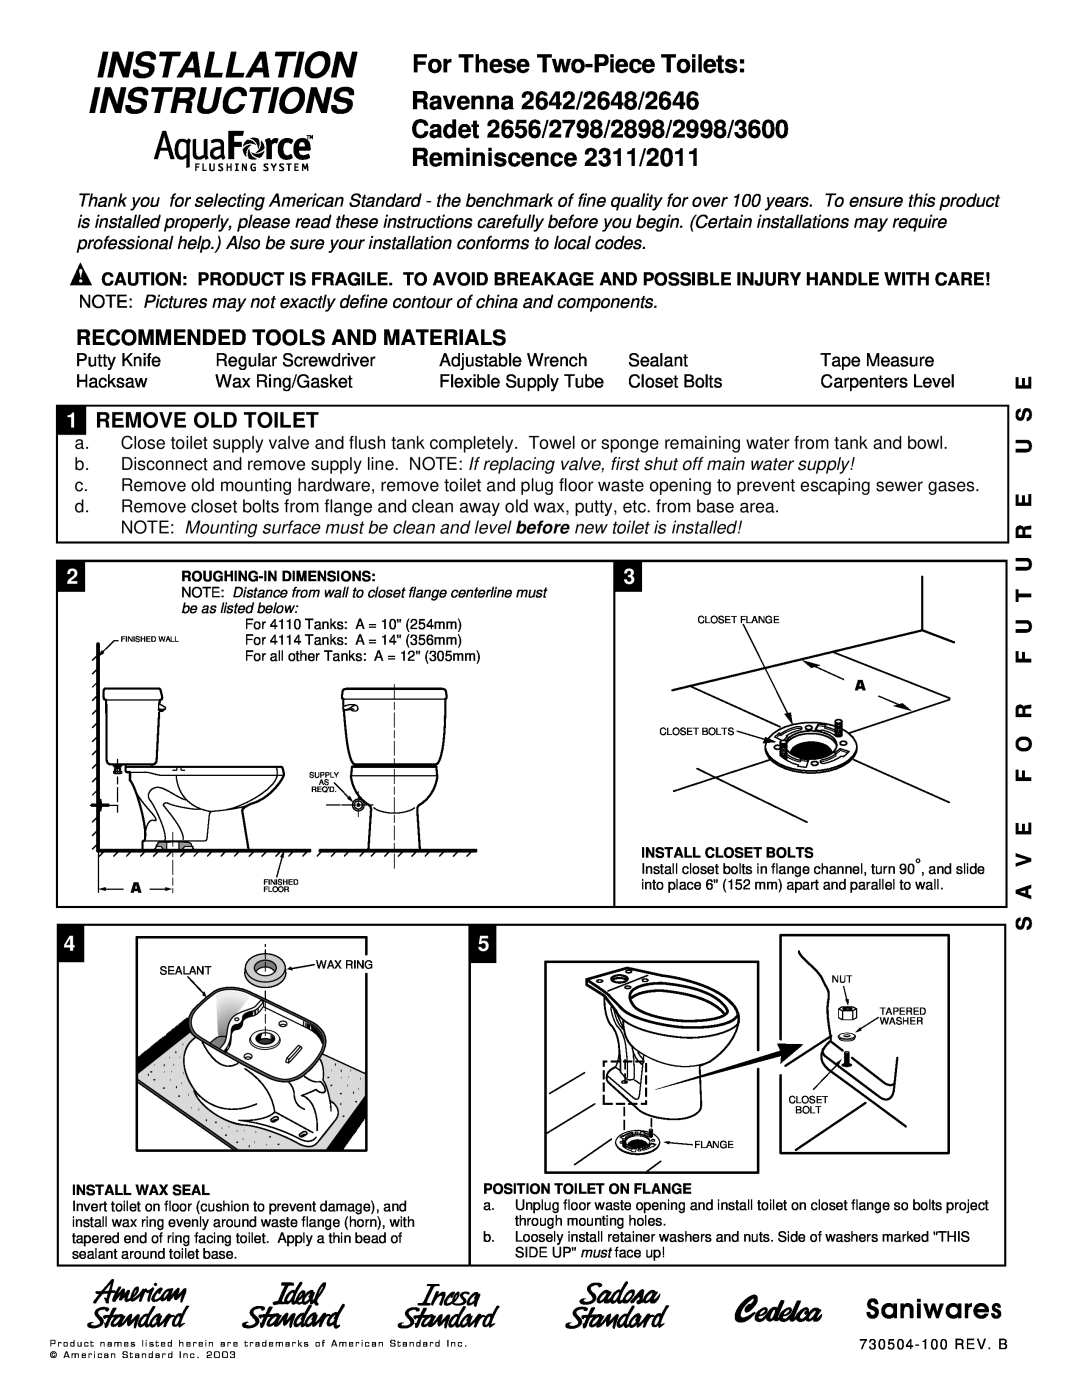 American Standard 3600, 2646 installation instructions Recommended Tools And Materials, 1REMOVE OLD TOILET, Installation 